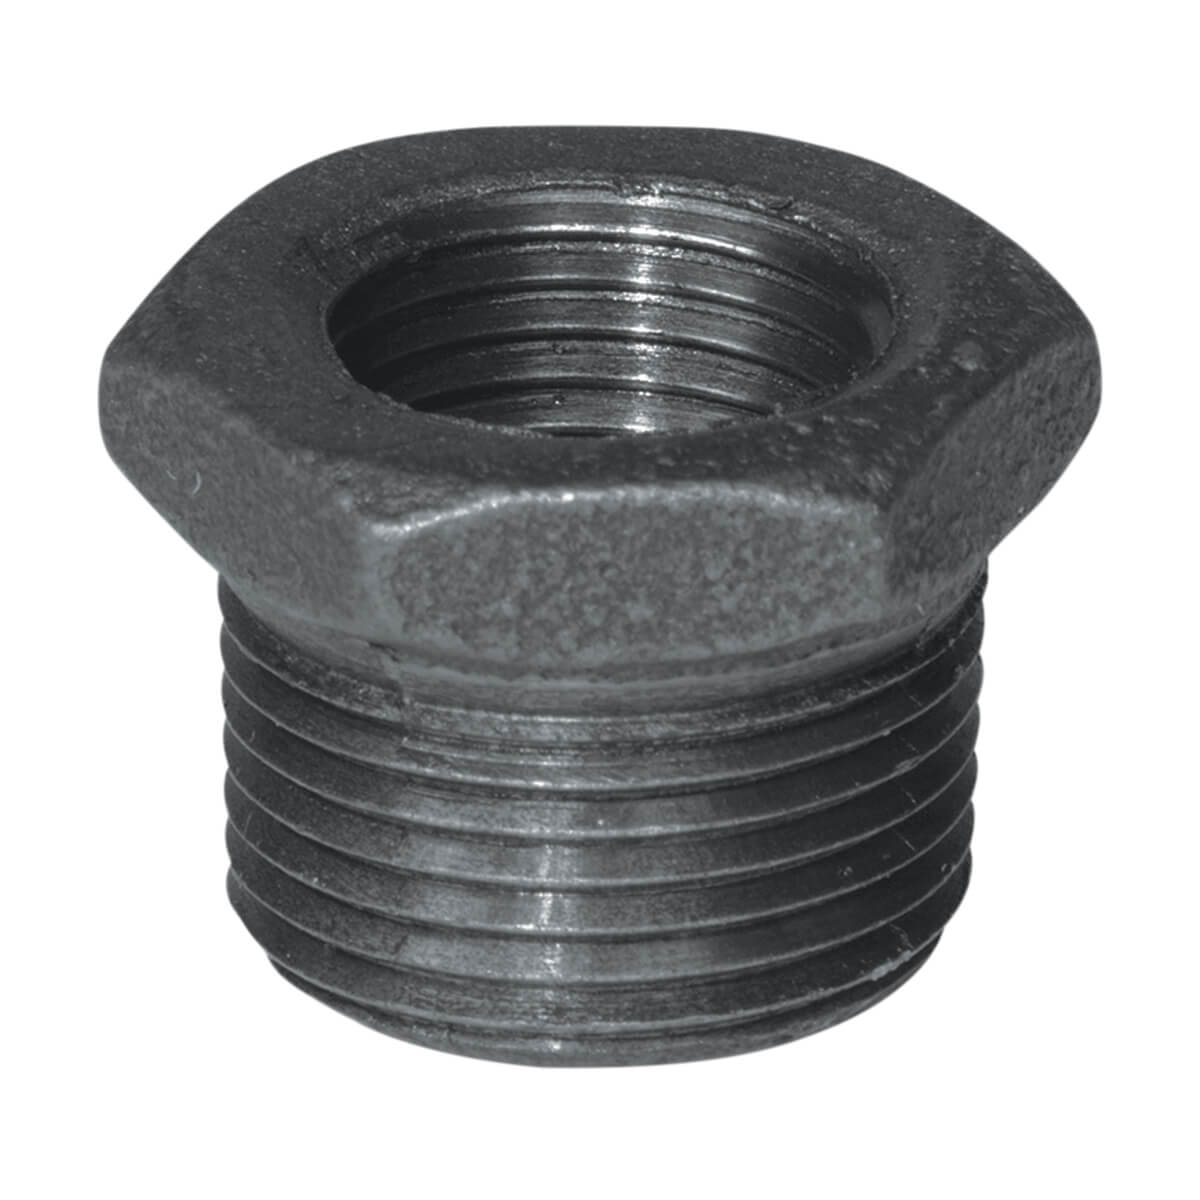 Fitting Black Iron Hex Bushing - 1-in x 1/2-in